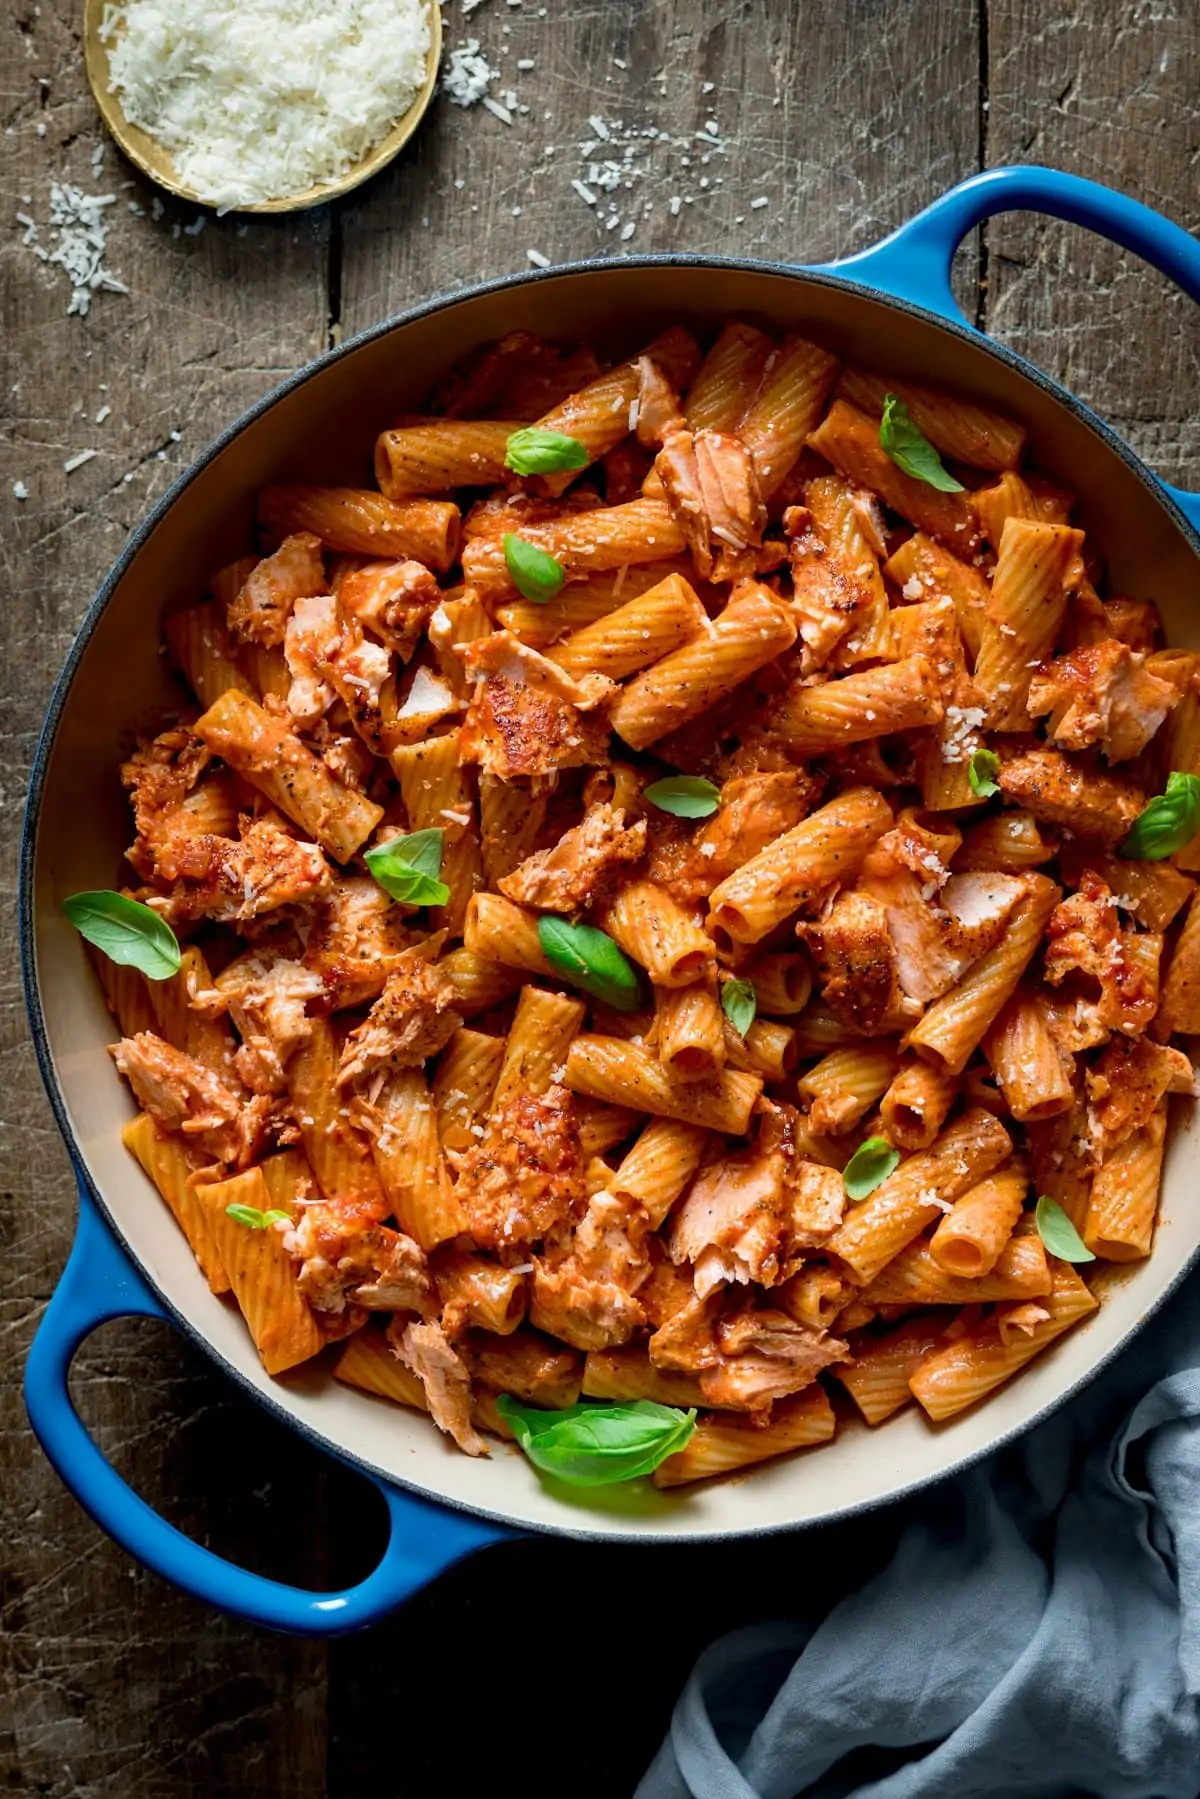 Overhead image of creamy tomato salmon and rigatoni in a blue cast iron pan on a wooden table. There is a dish of grated parmesan at the top of the image.